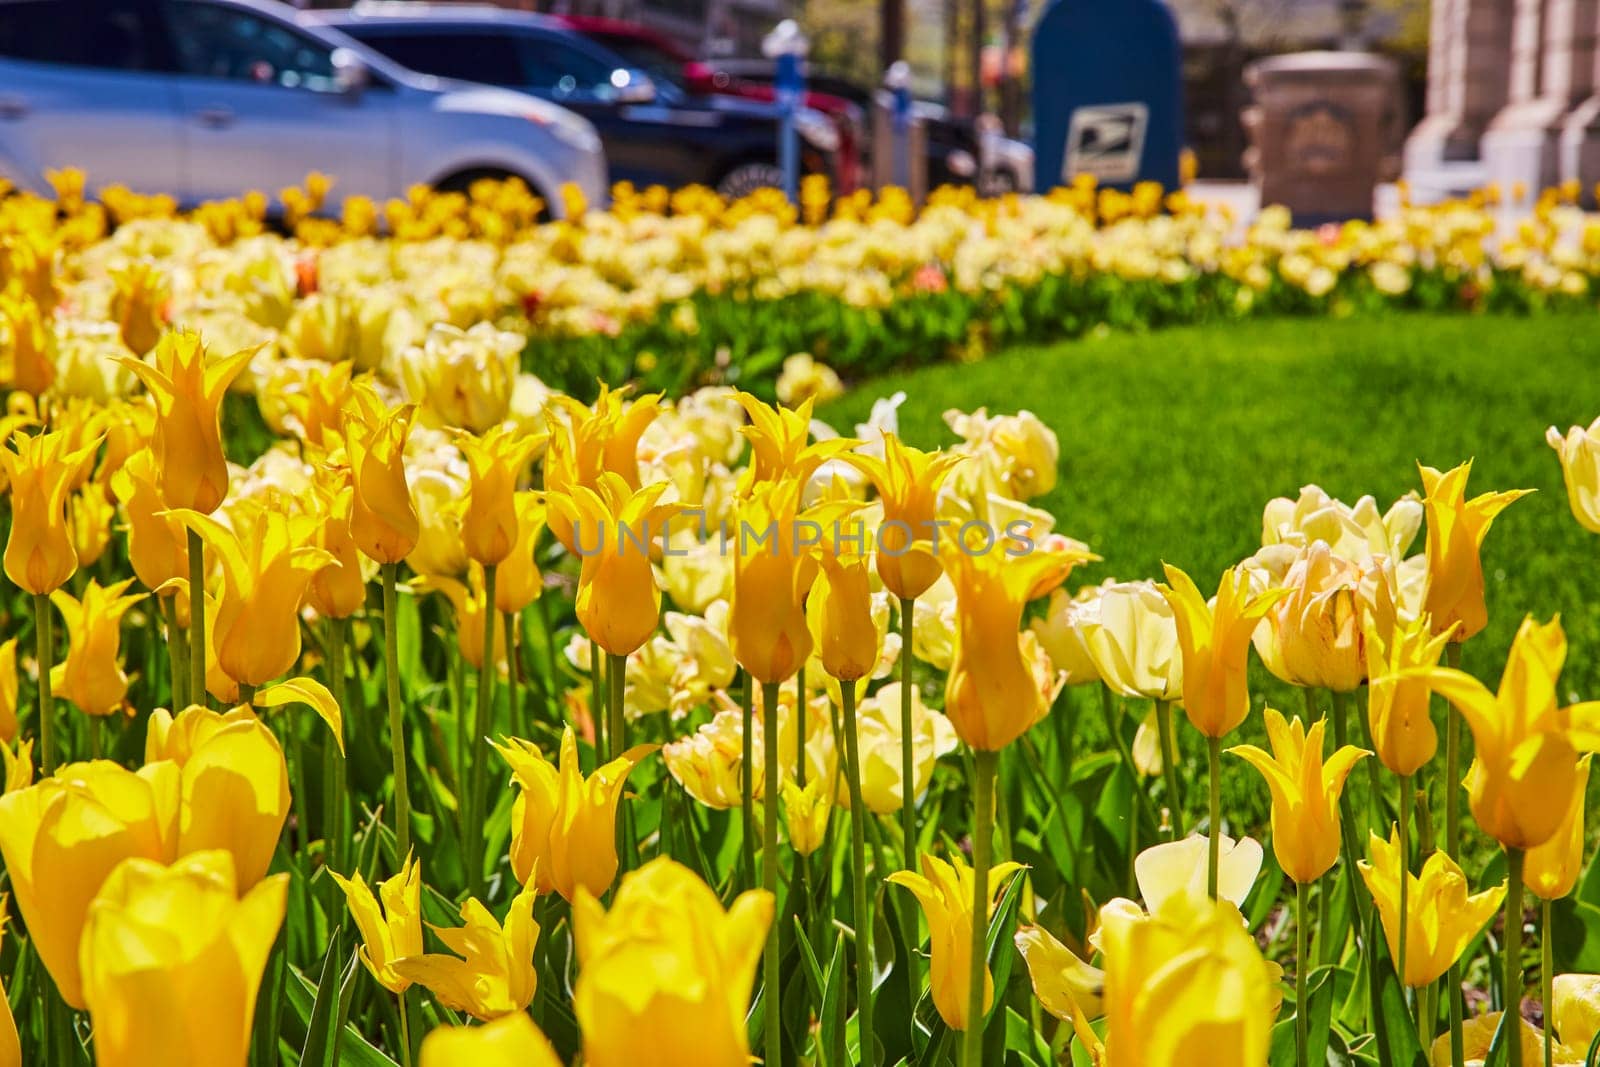 Bright midday sun illuminates a vibrant tulip garden in downtown Fort Wayne, blending nature with urban life.